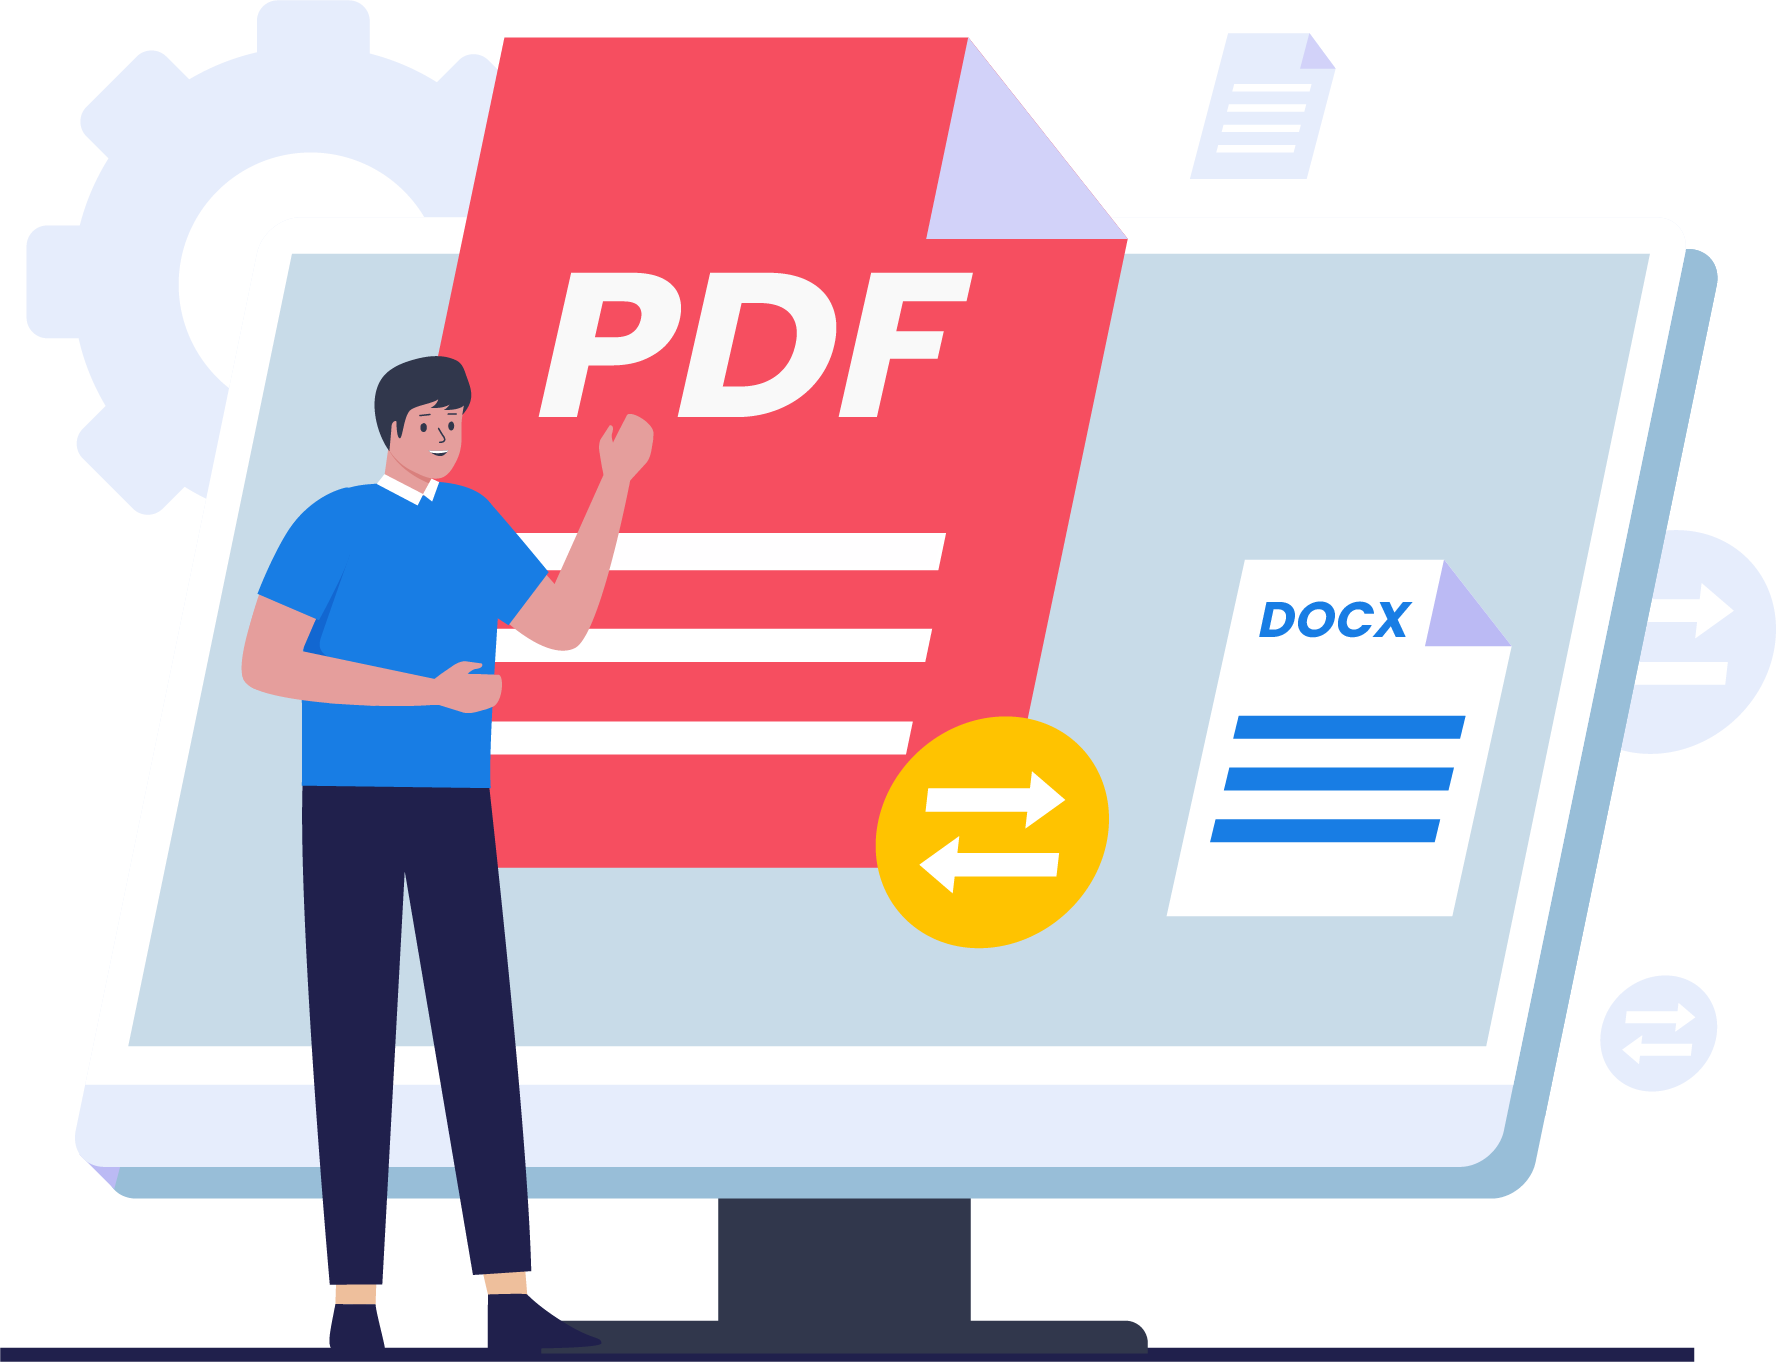 Convert From PDF to WORD